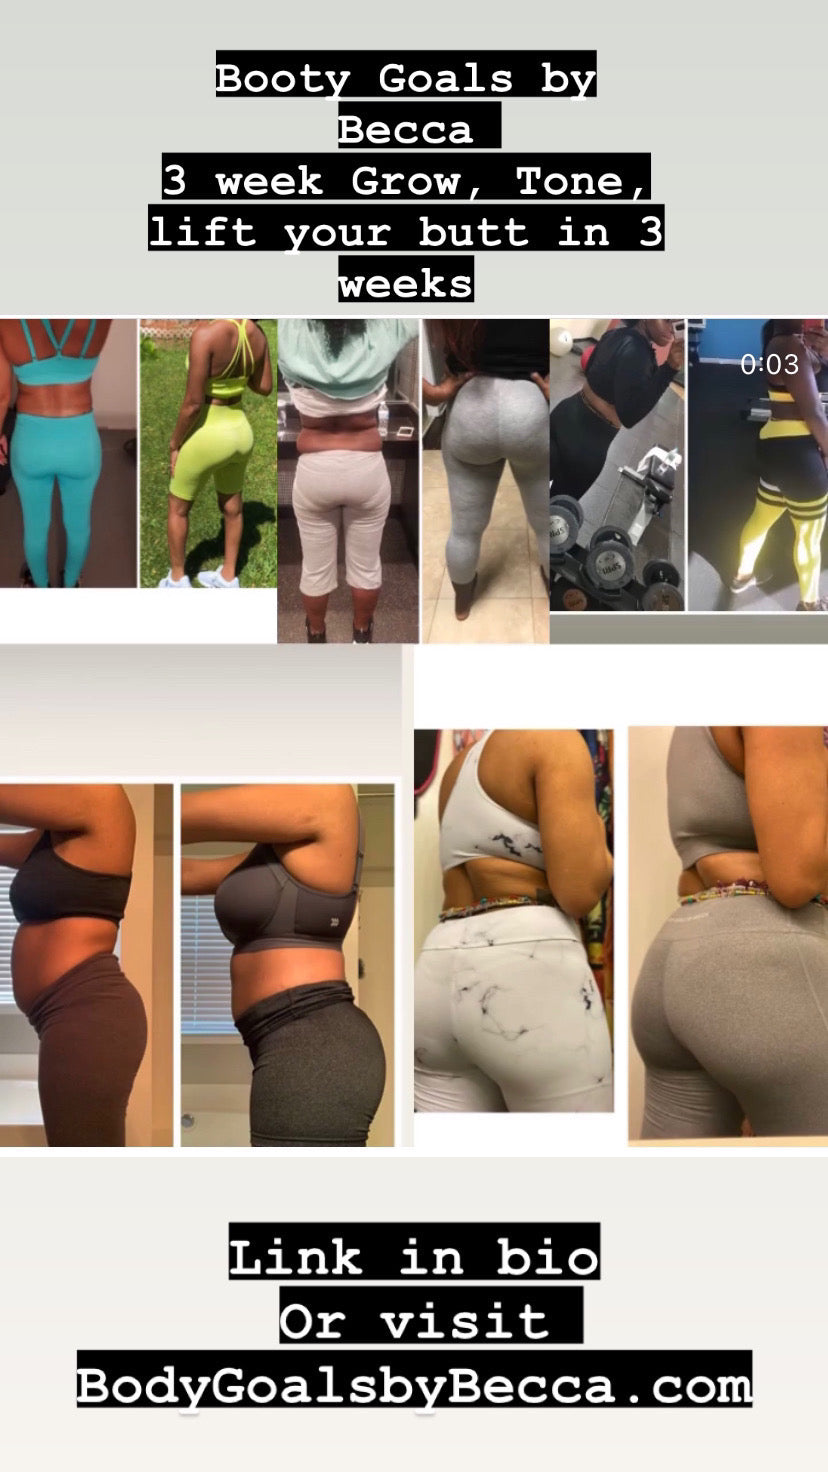 BOOTY GOALS BY BECCA "GROW YOUR GLUTES IN 3 WEEKS" PROGRAM (Digital Download)